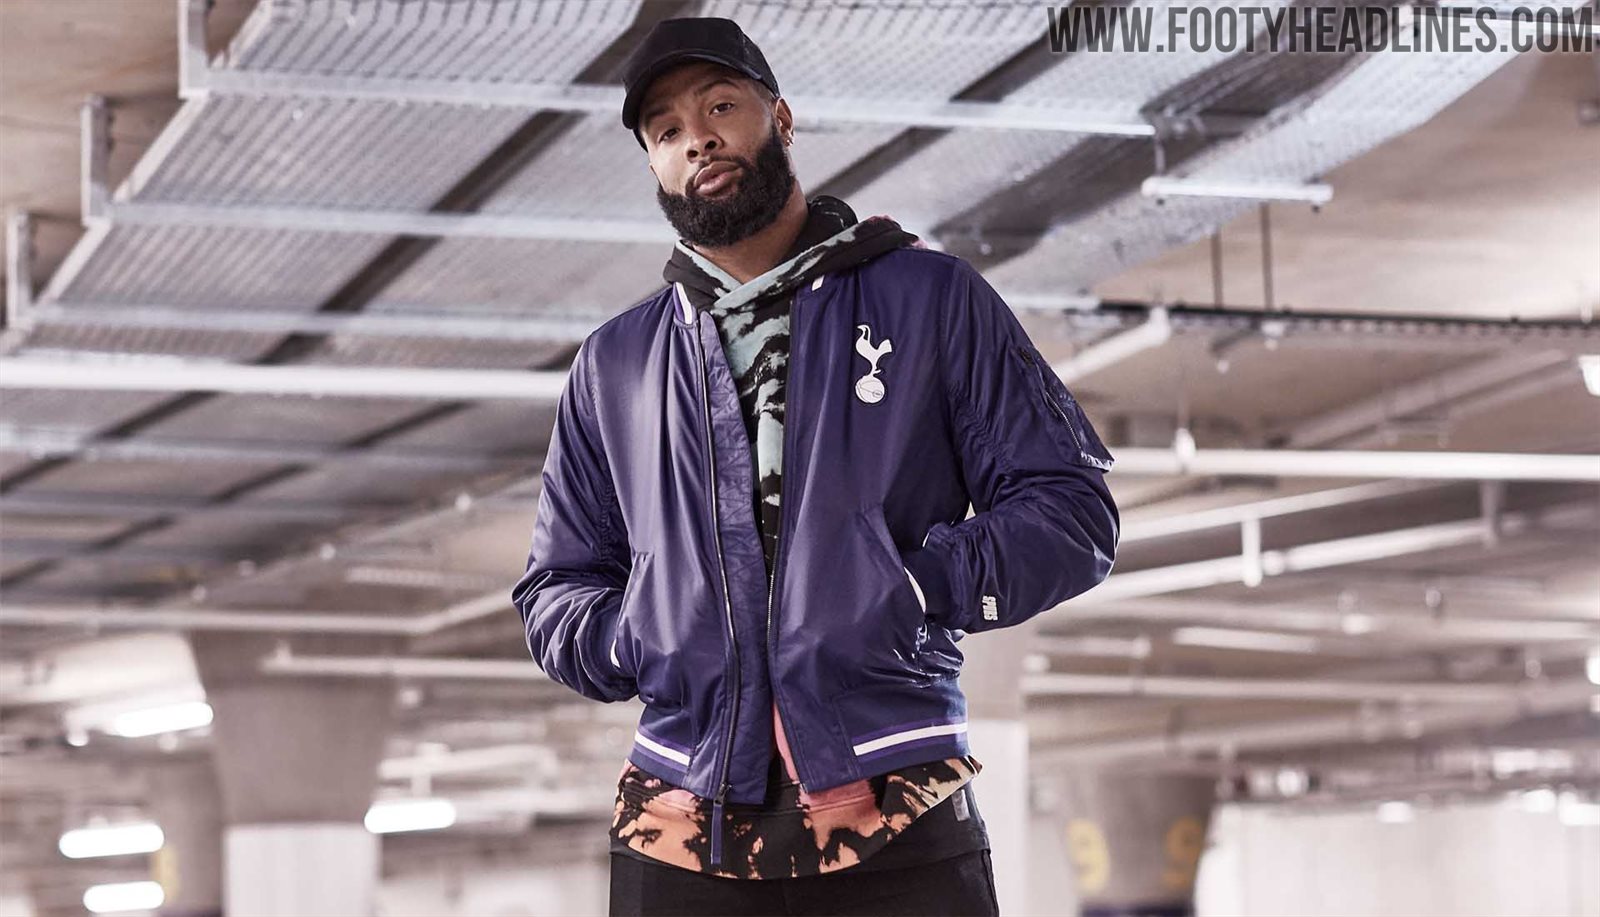 Nike Tottenham Hotspur 2019 NFL Collection Released - Footy Headlines